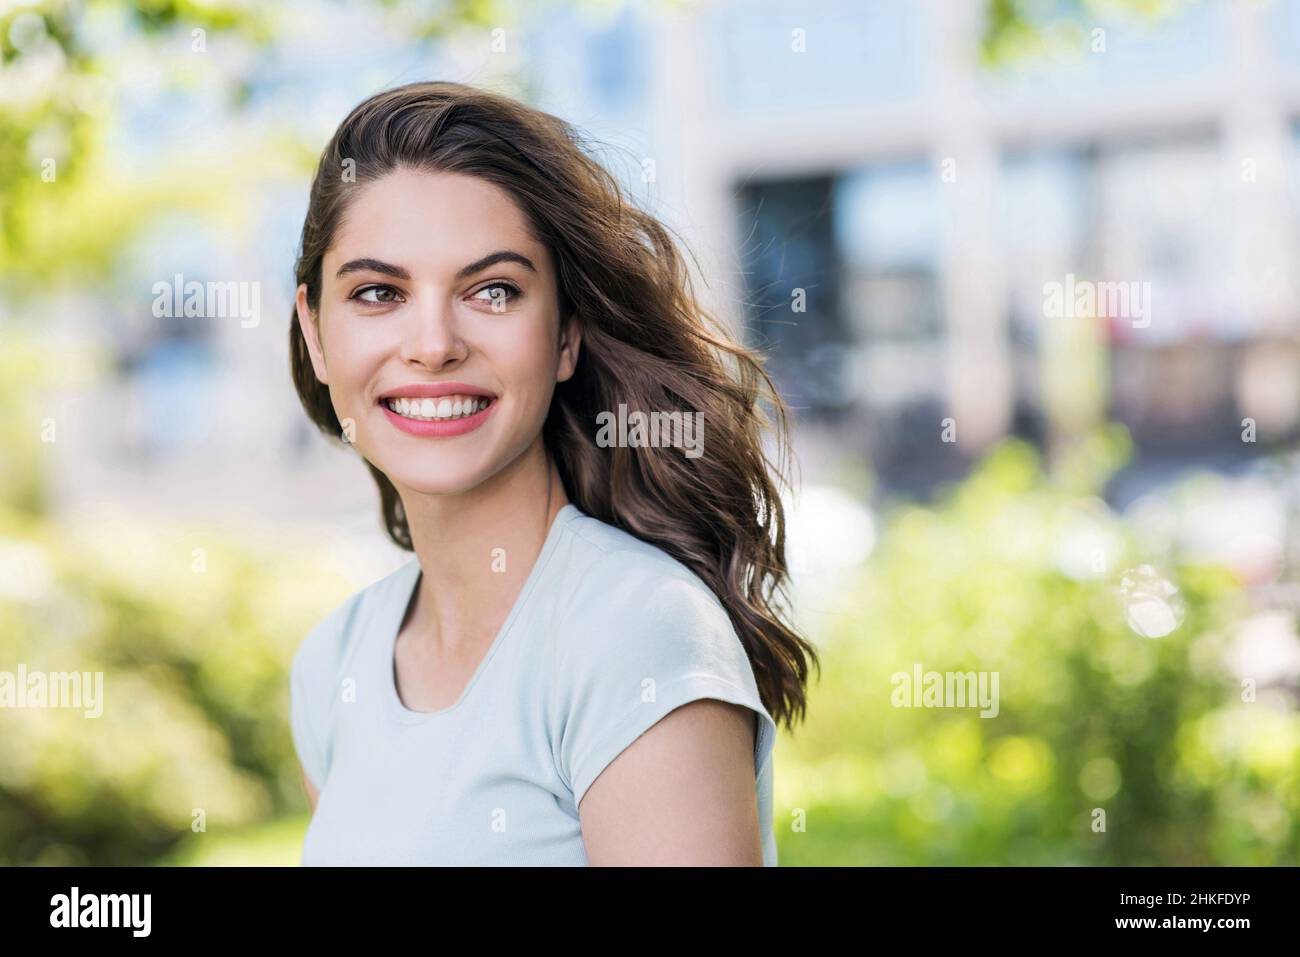 Beautiful happy young woman closeup portrait. Pretty model girl with perfect fresh clean skin smiling outdoors, Stock Photo